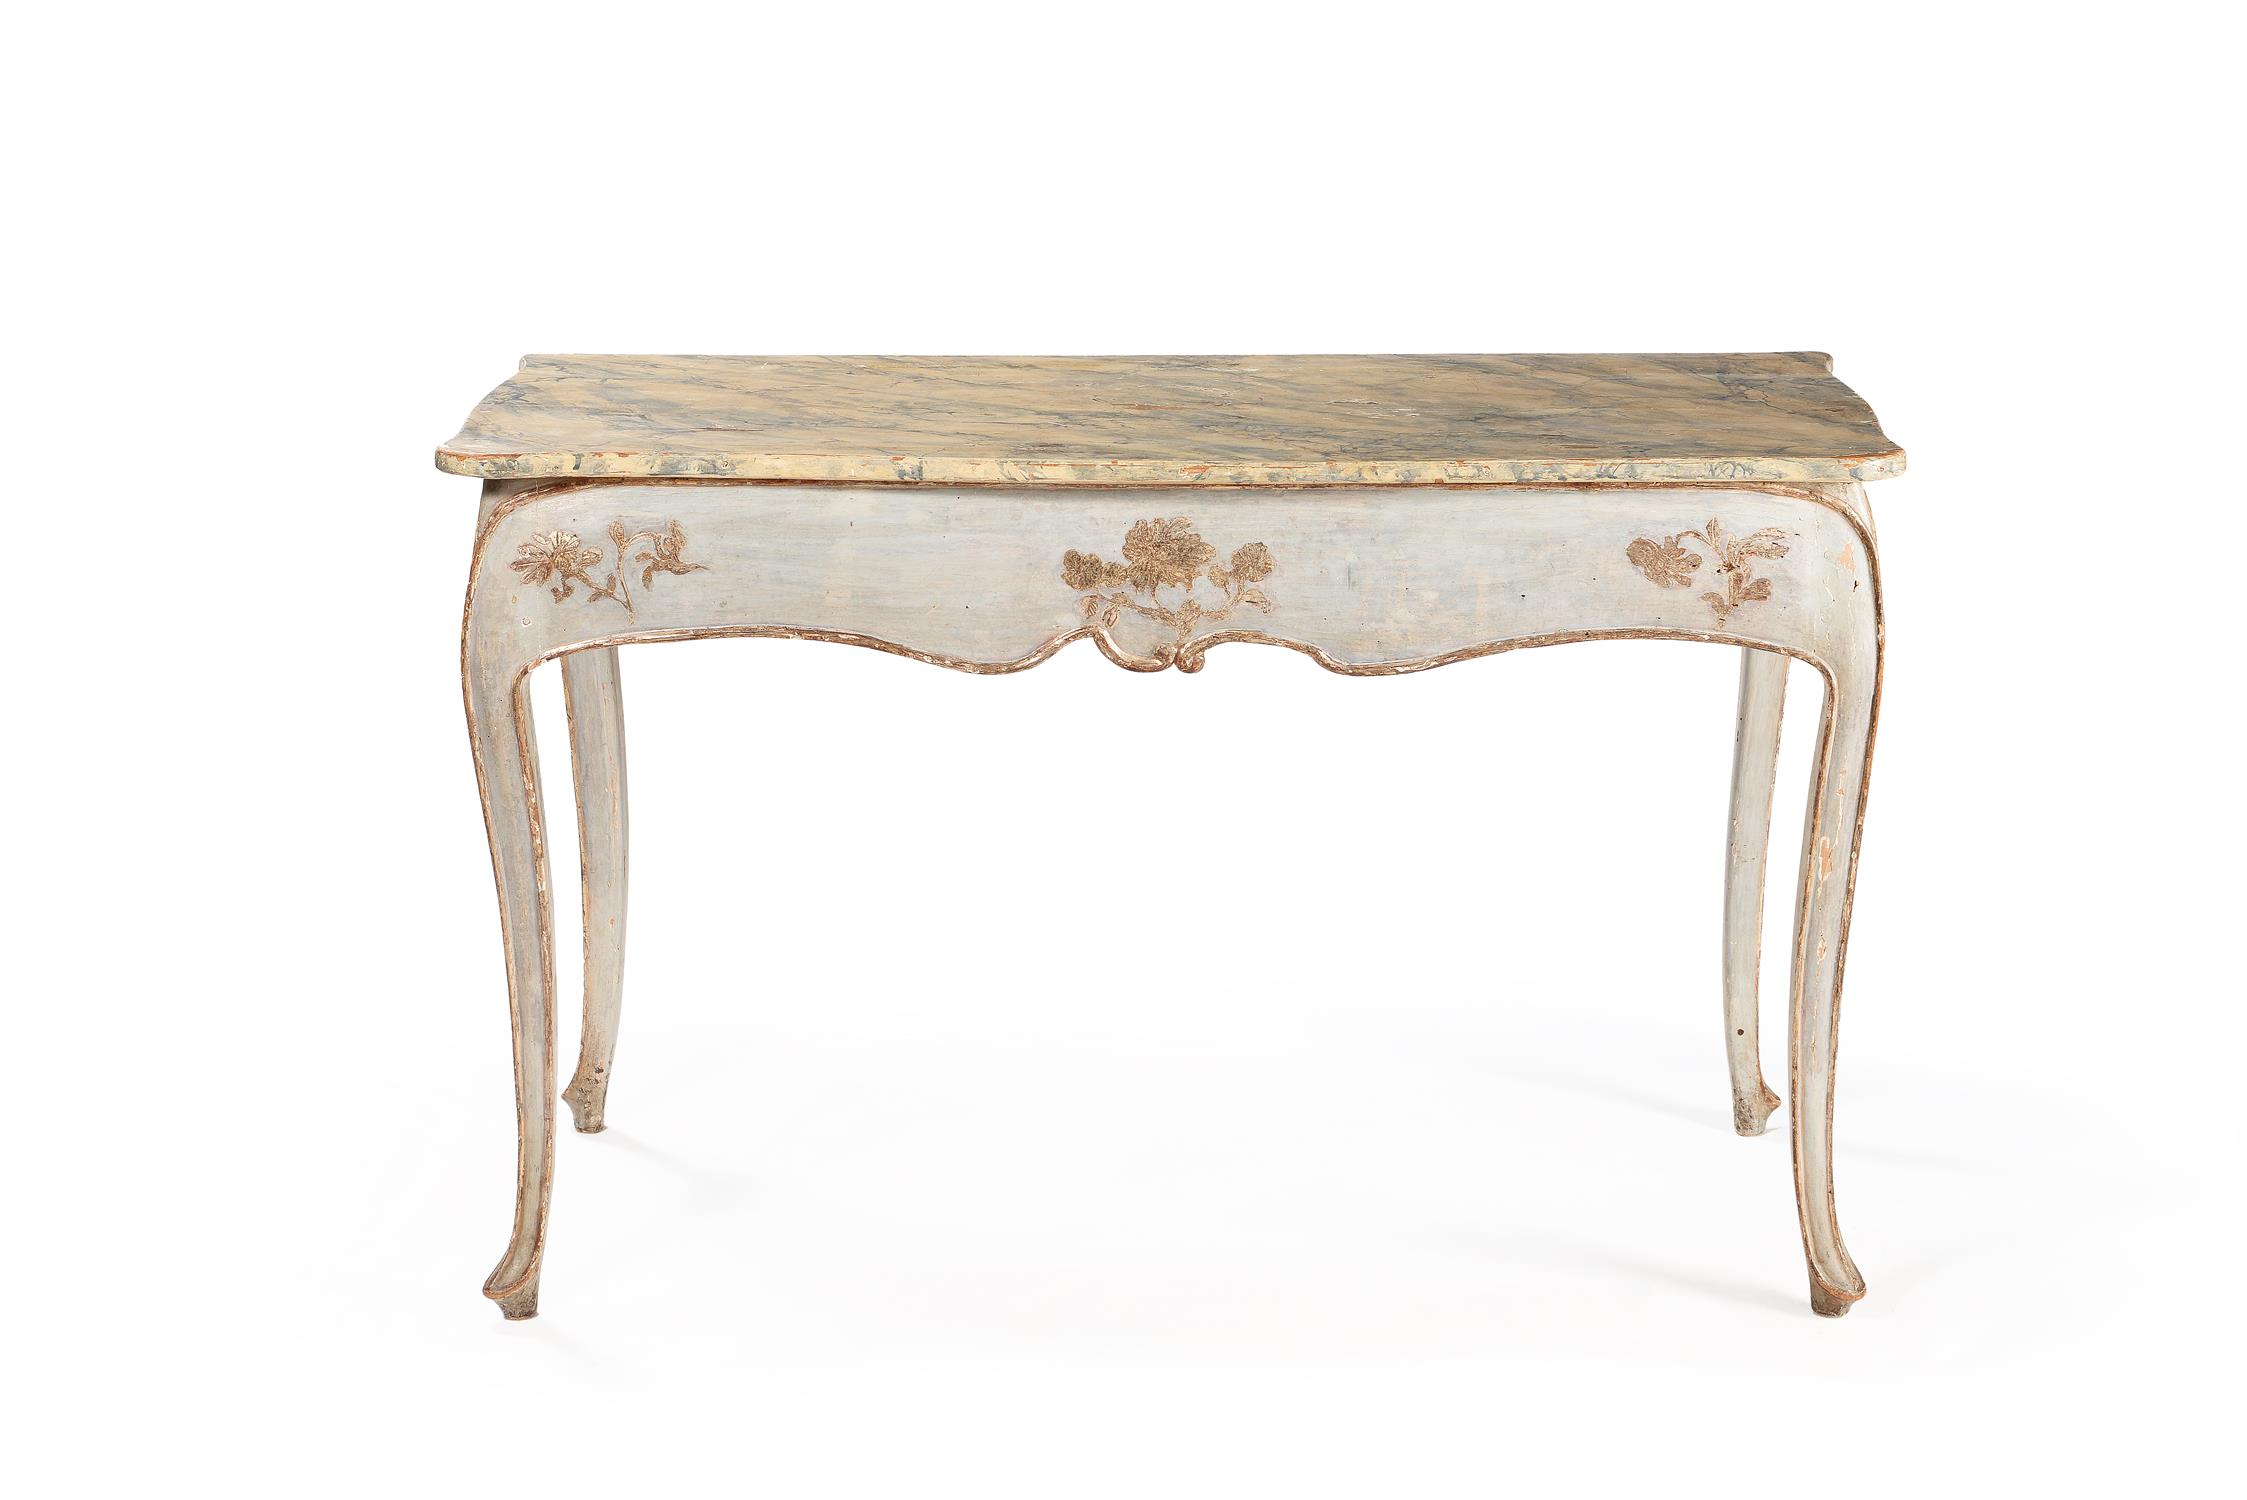 An Italian painted and silvered side or console table, circa 1770 - Image 2 of 6